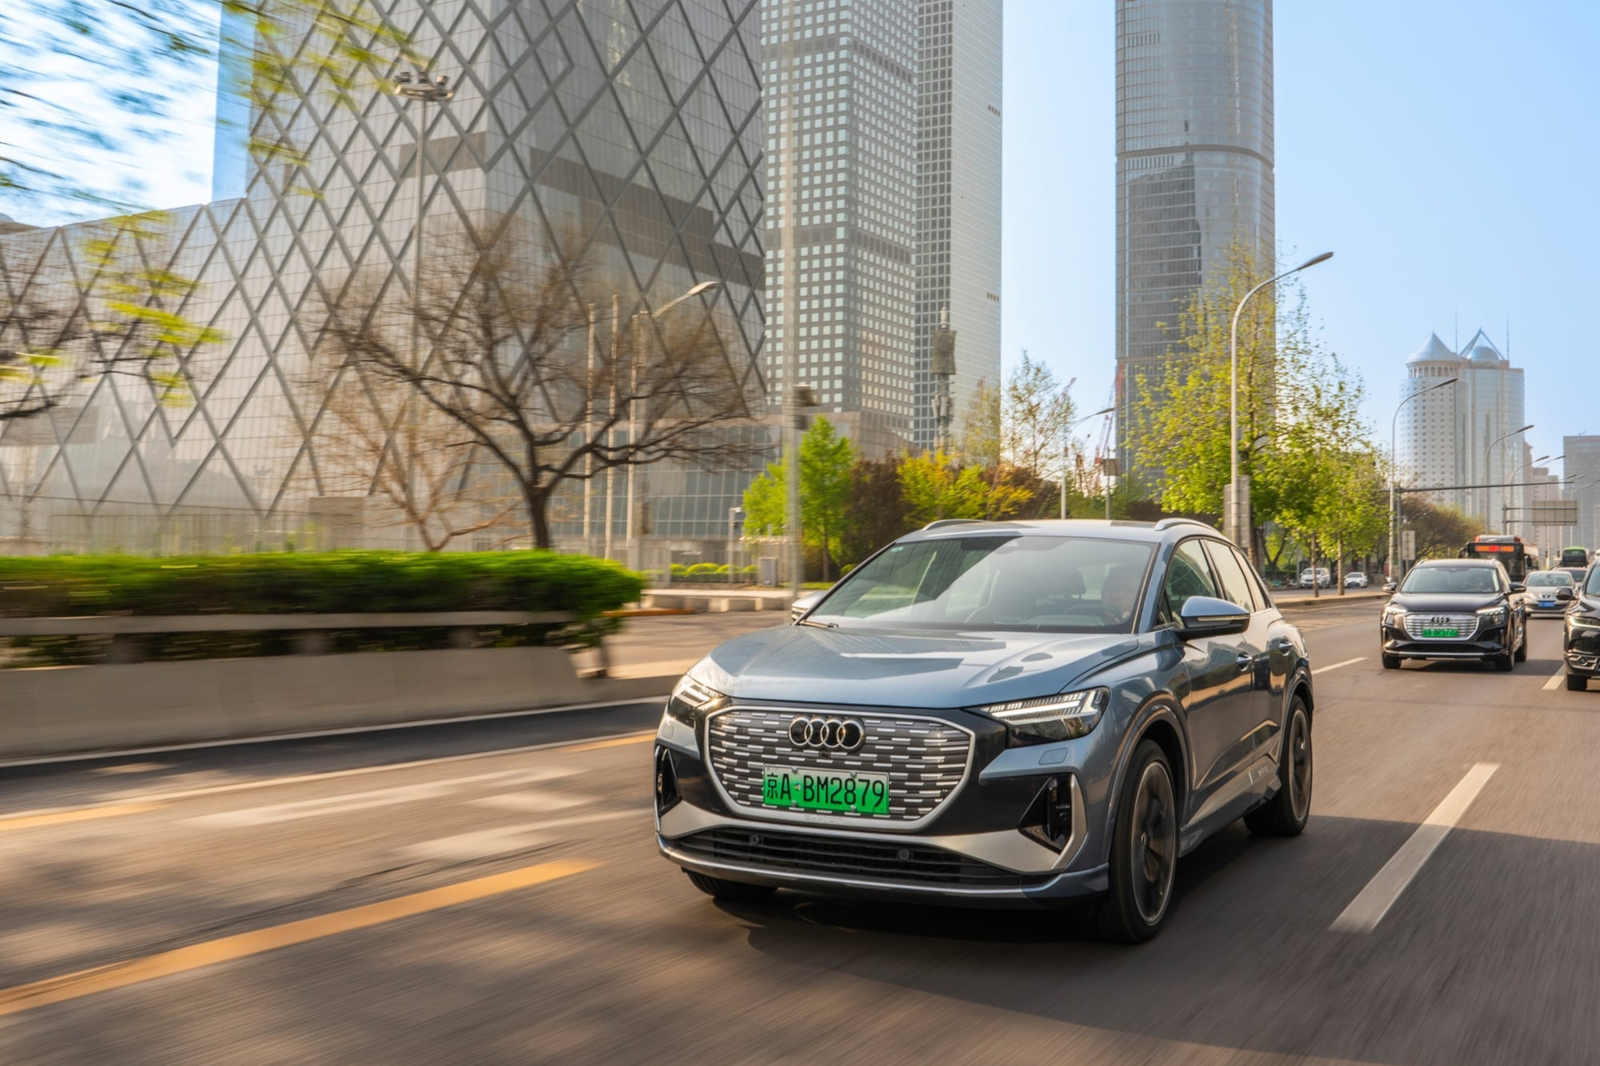 technology, industry news, audi confirms chinese battery expertise for new evs